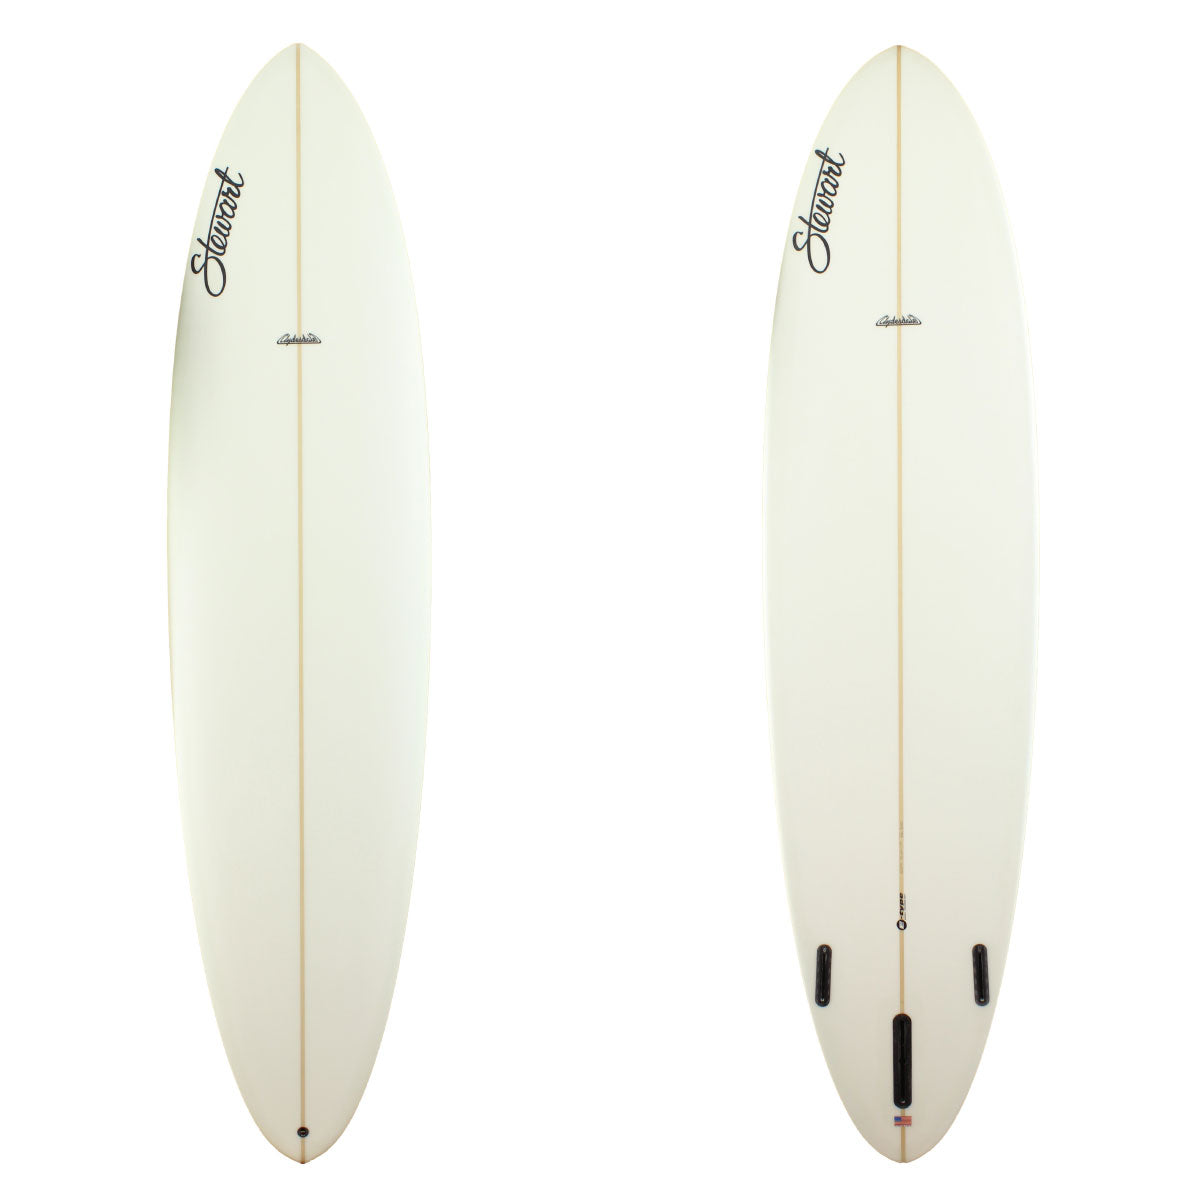 Stewart Surfboardss 9'0" Clydesdale with clear white deck and bottom